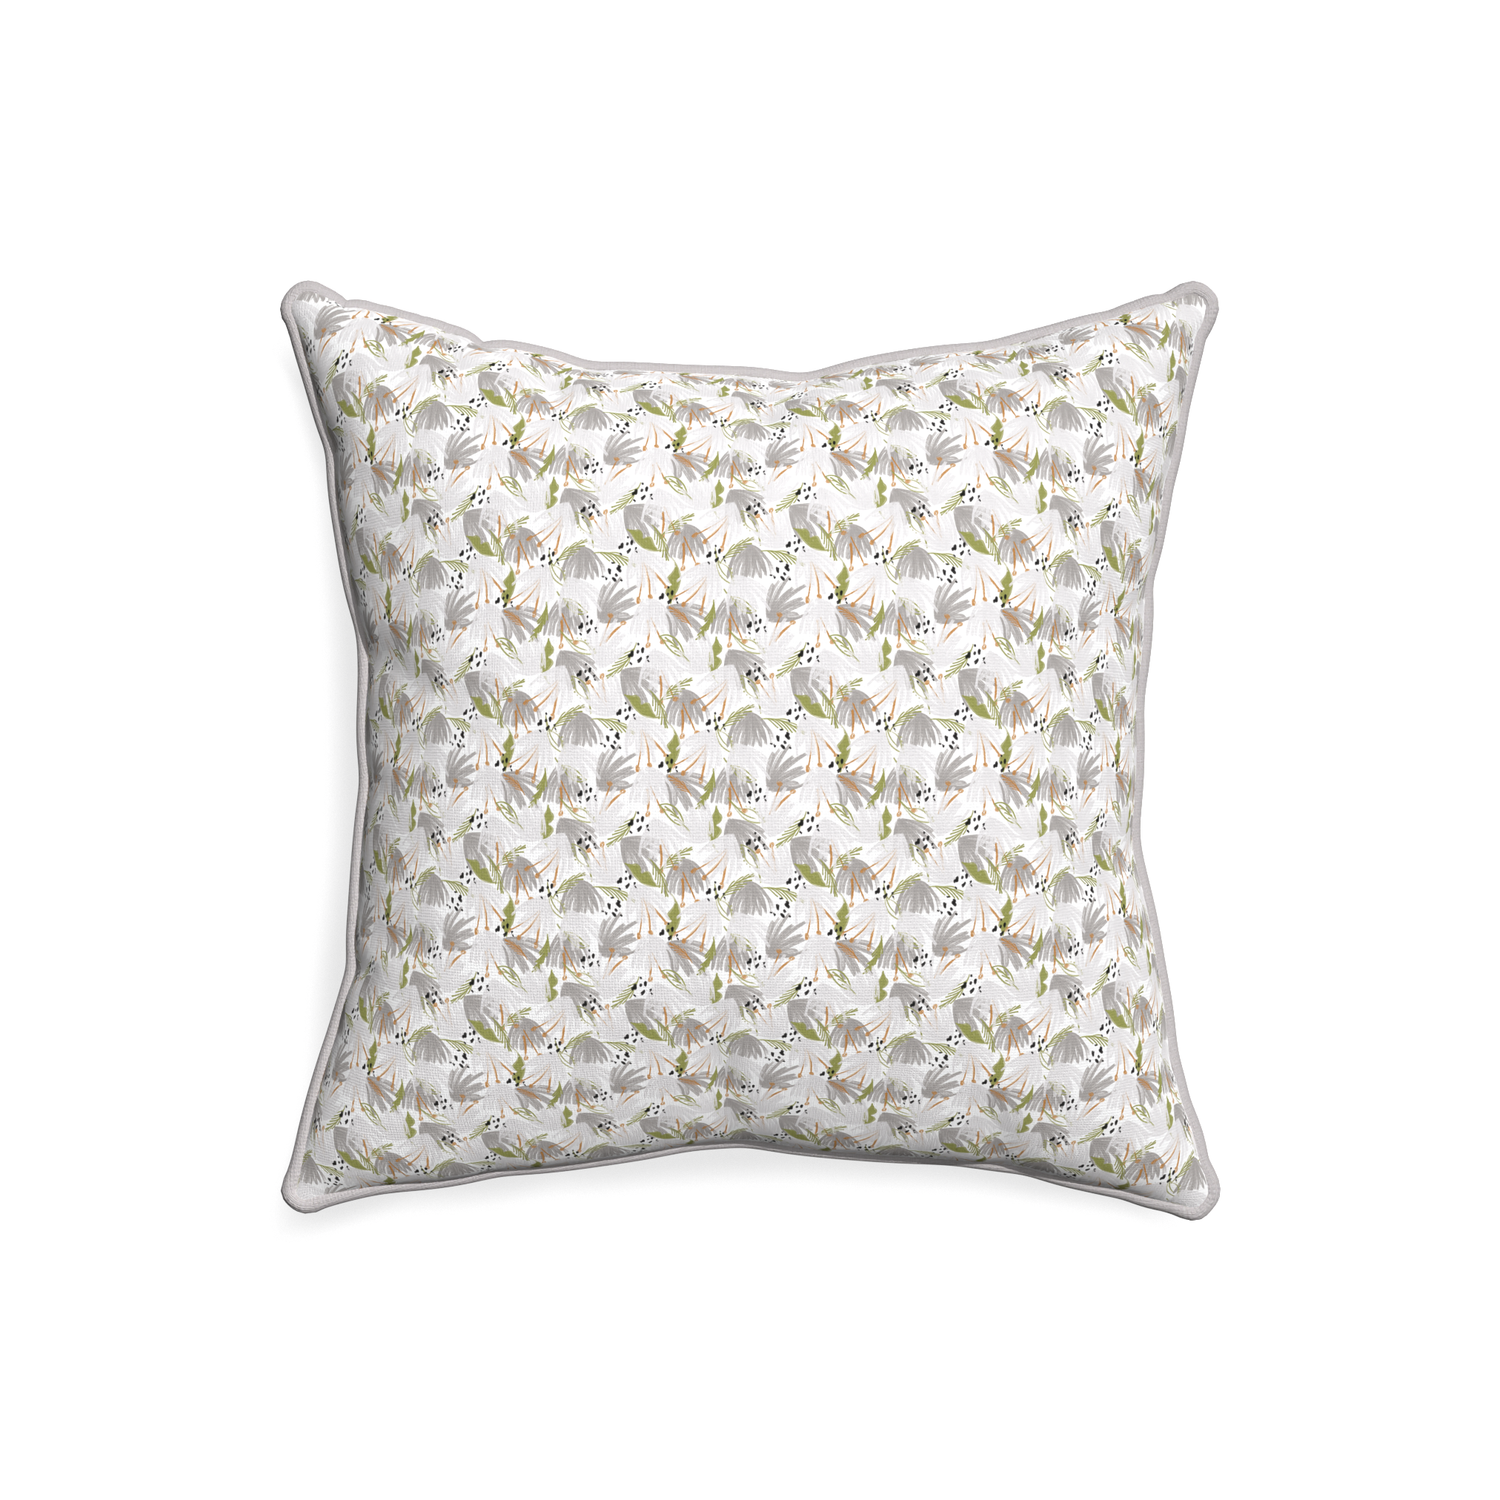 20-square eden grey custom pillow with pebble piping on white background